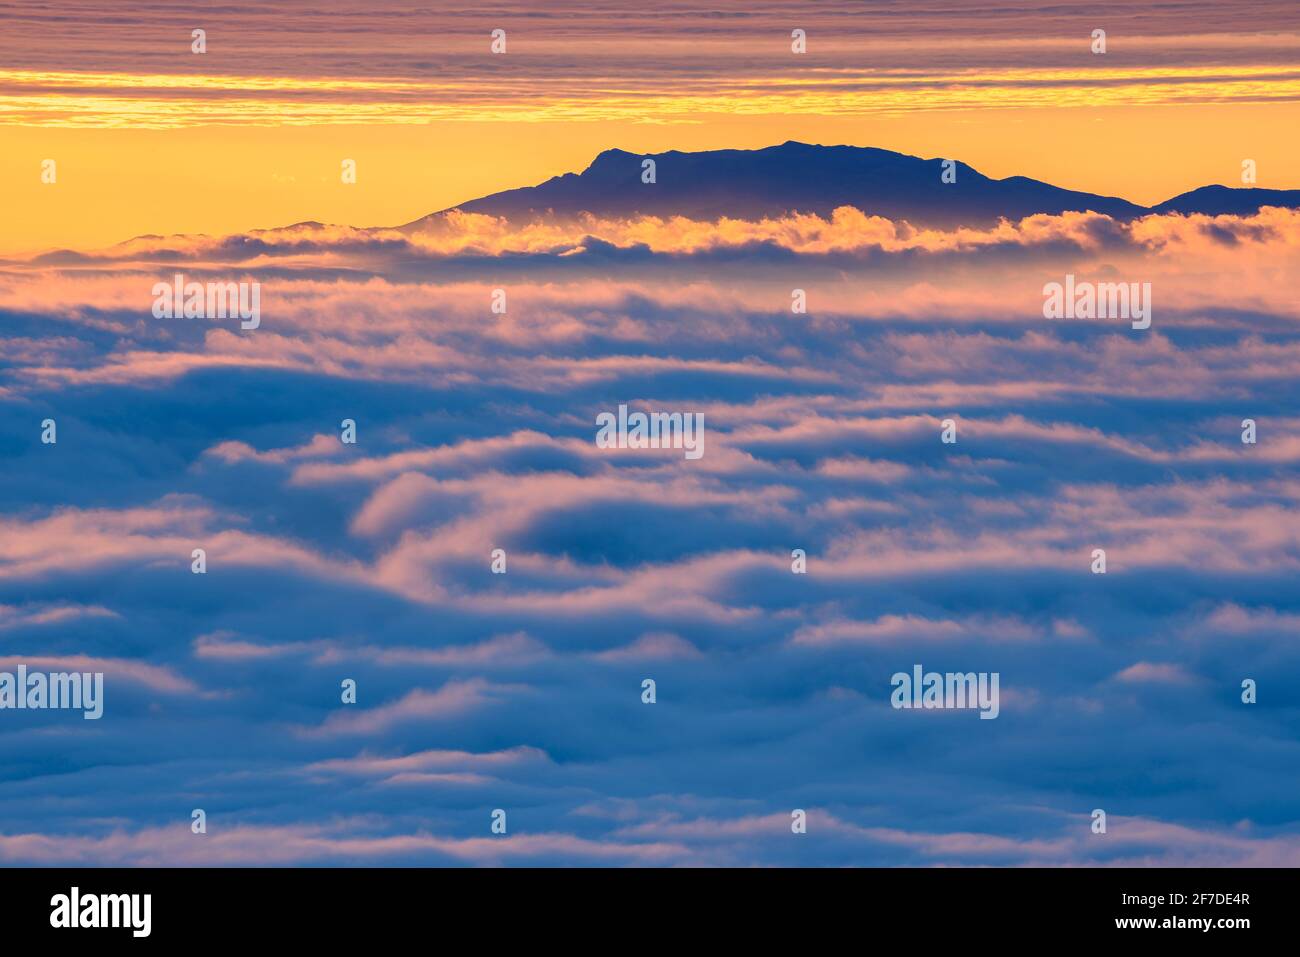 Montseny mountain in a winter sunrise over a sea of clouds seen from the Figuerassa viewpoint, (Berguedà, Catalonia, Spain, Pyrenees) Stock Photo